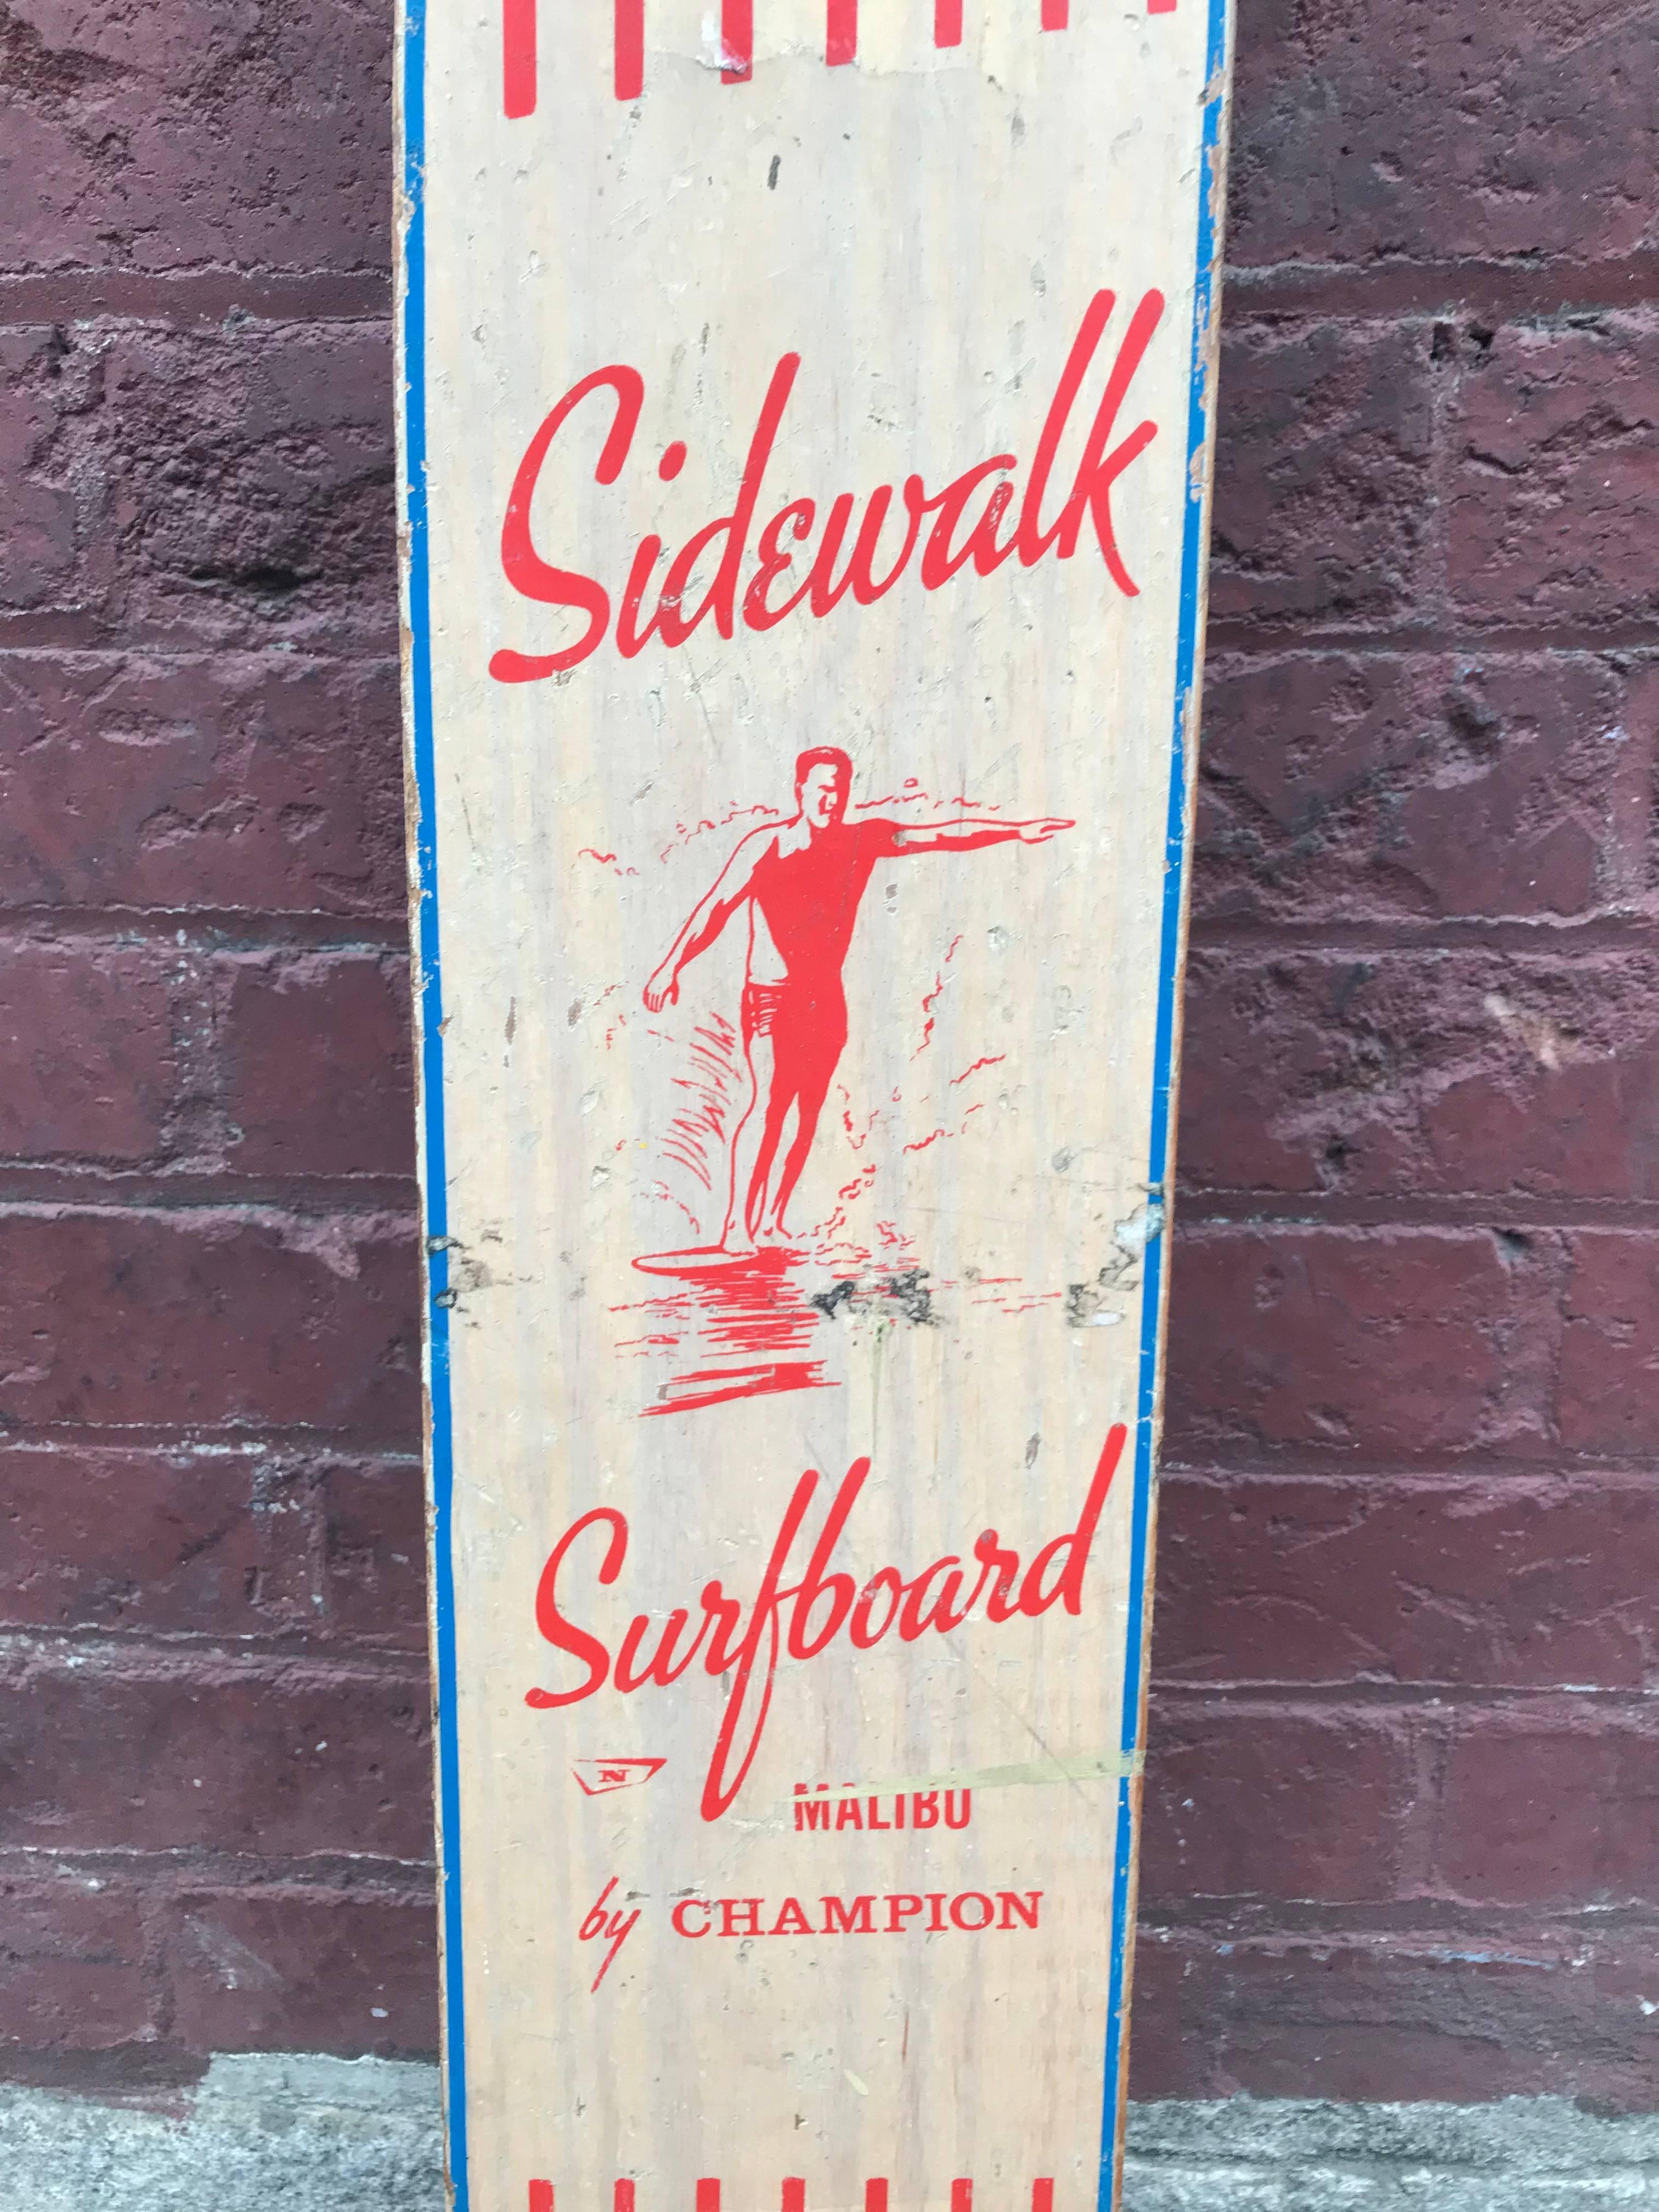 A wonderful example of a skateboard deck by Champion called the Sidewalk Surfboard Malibu with a surf dude hanging 10 on the nose.